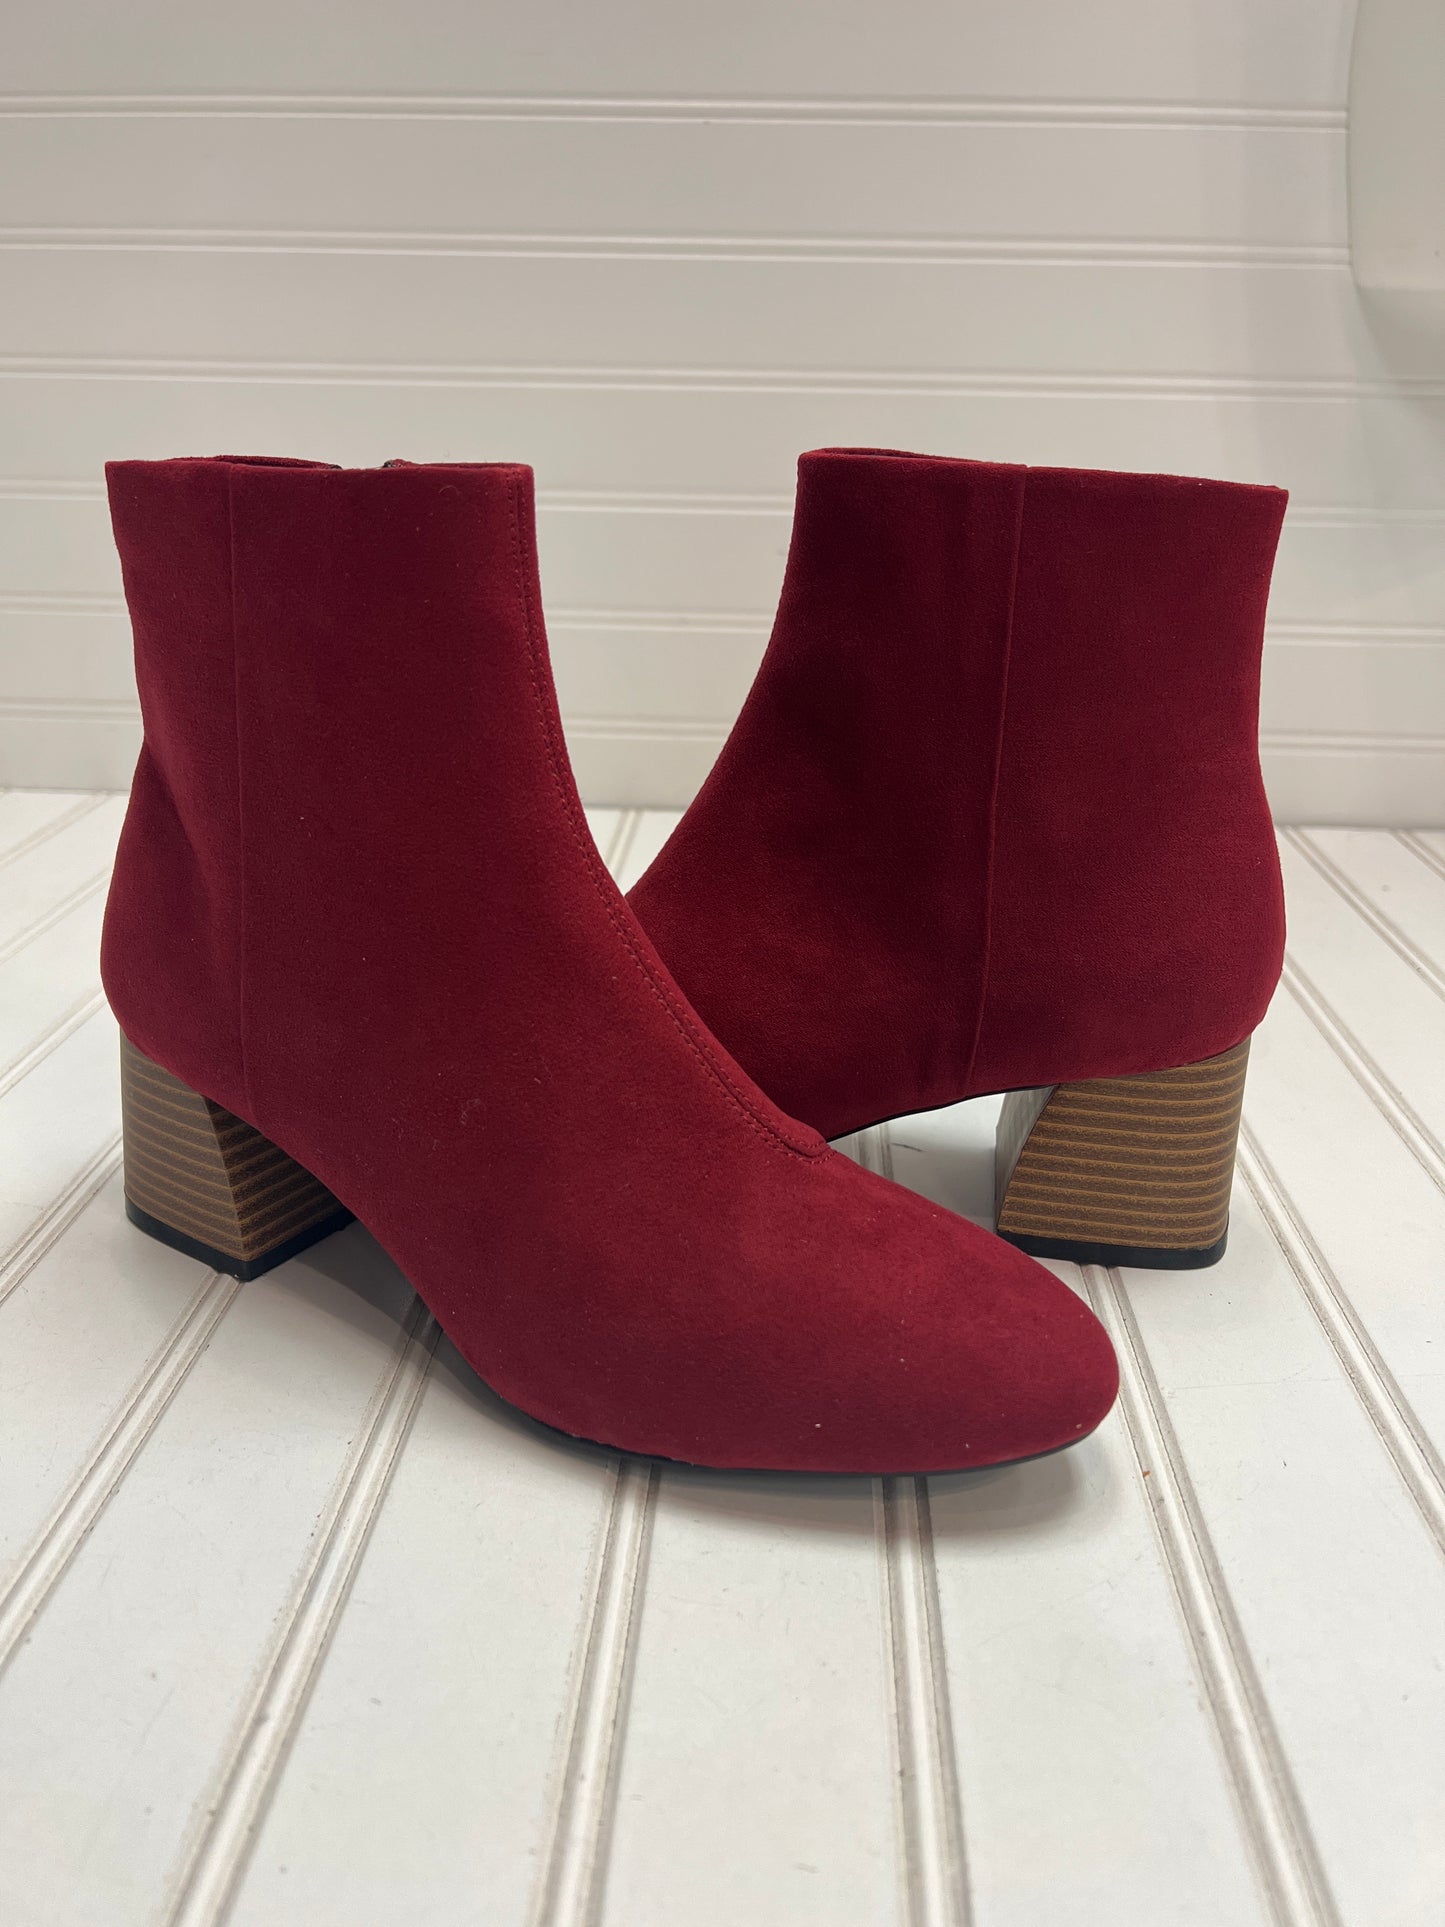 Boots Ankle Heels By Top Shop  Size: 6.5